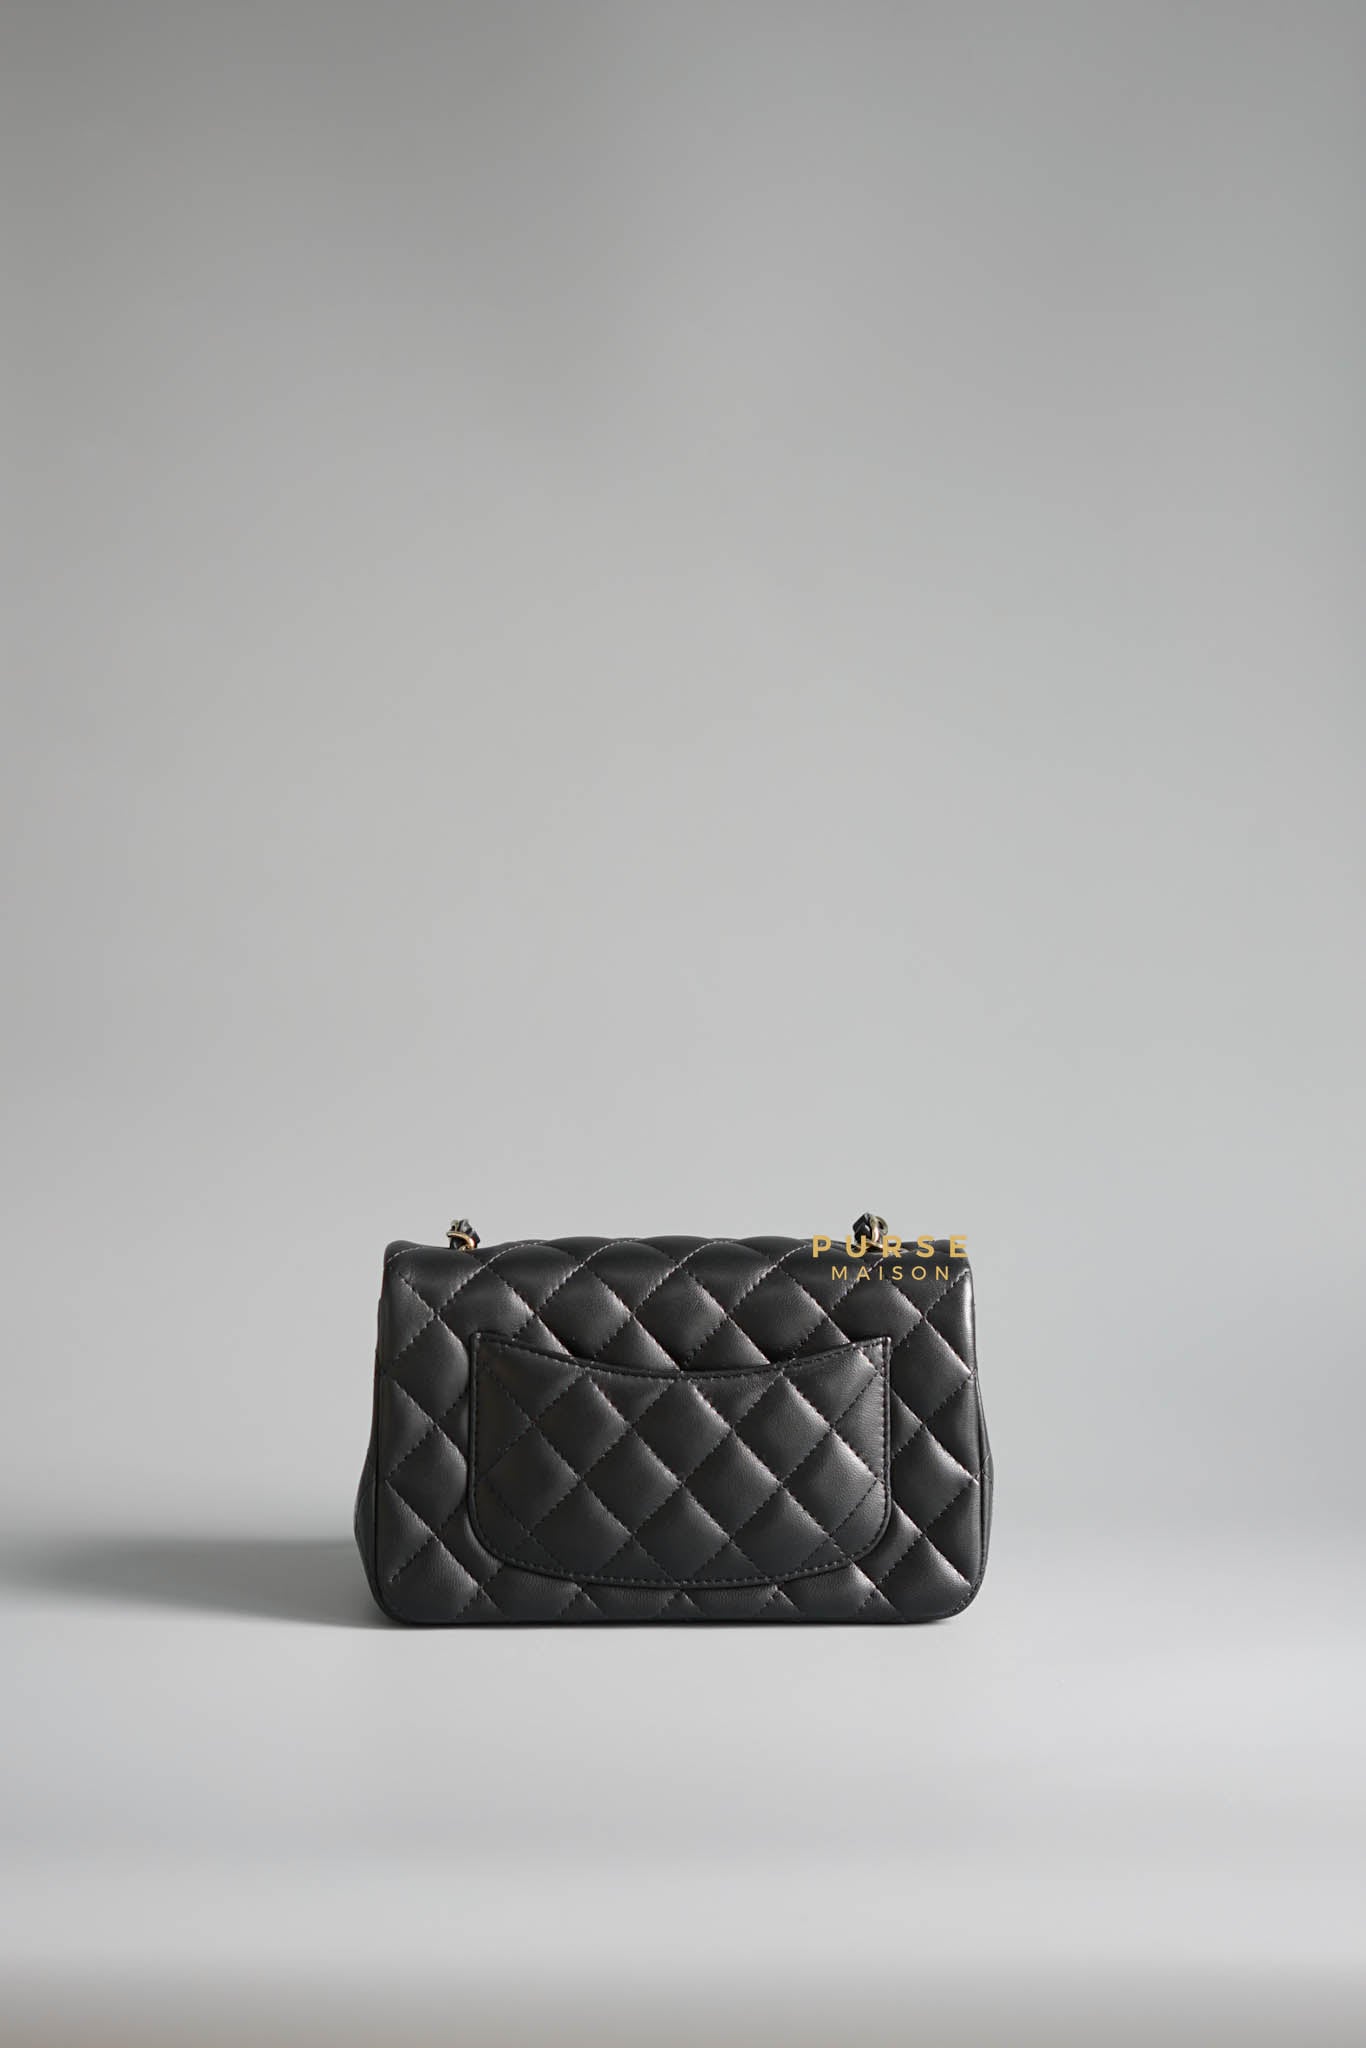 Chanel Black Mini Rectangle in Quilted Black Lambskin and Light Gold Hardware (Microchip) | Purse Maison Luxury Bags Shop